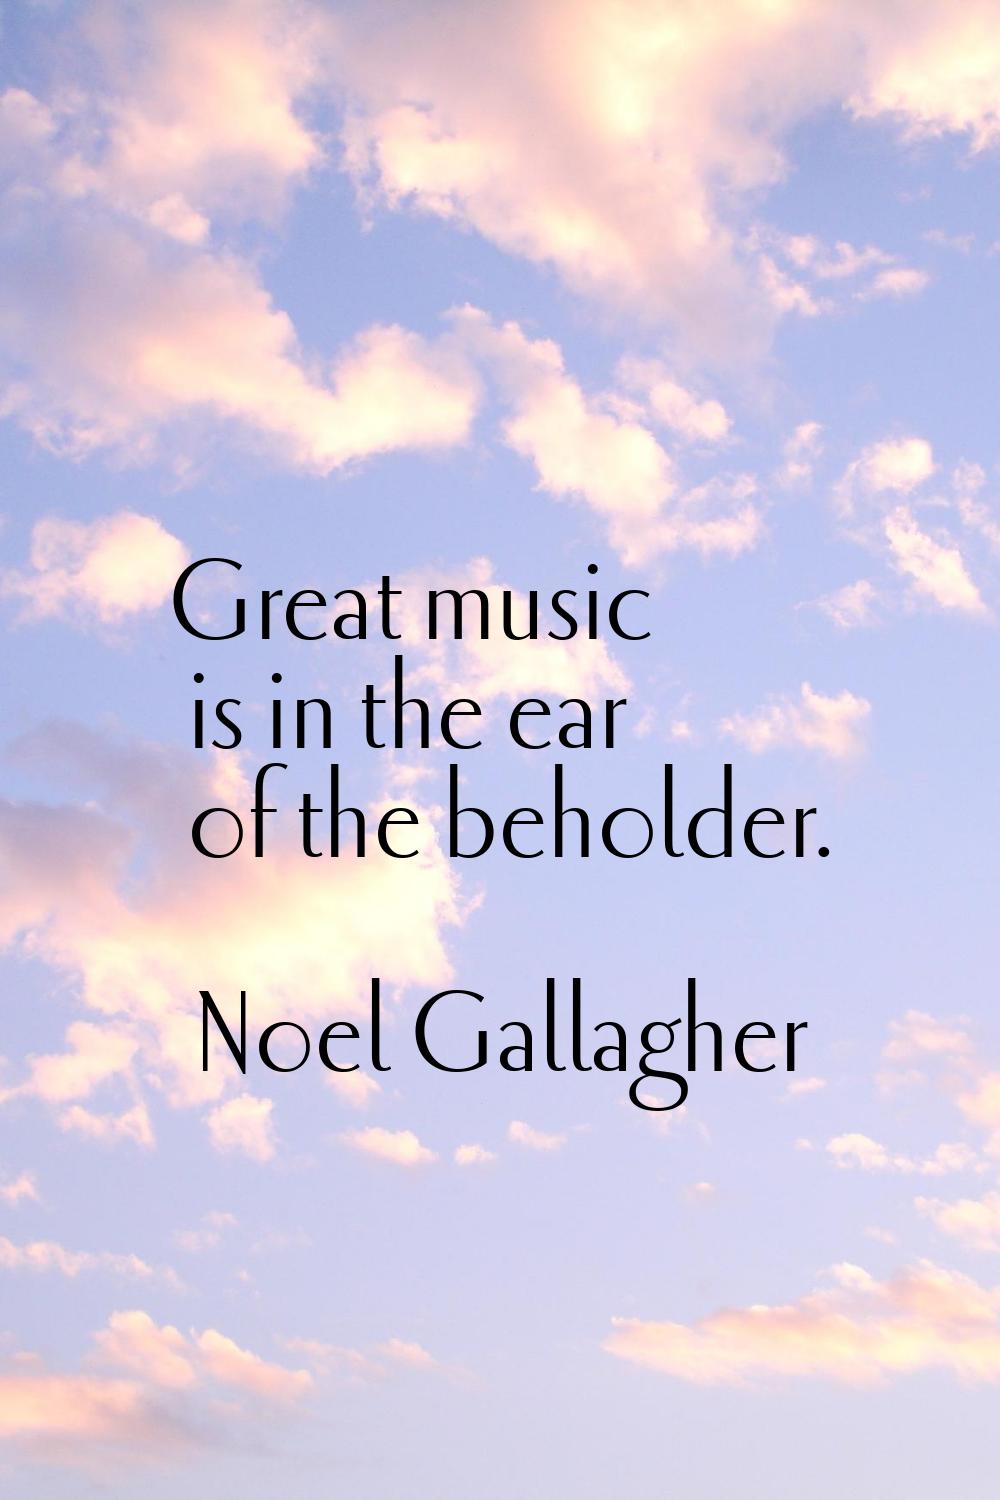 Great music is in the ear of the beholder.